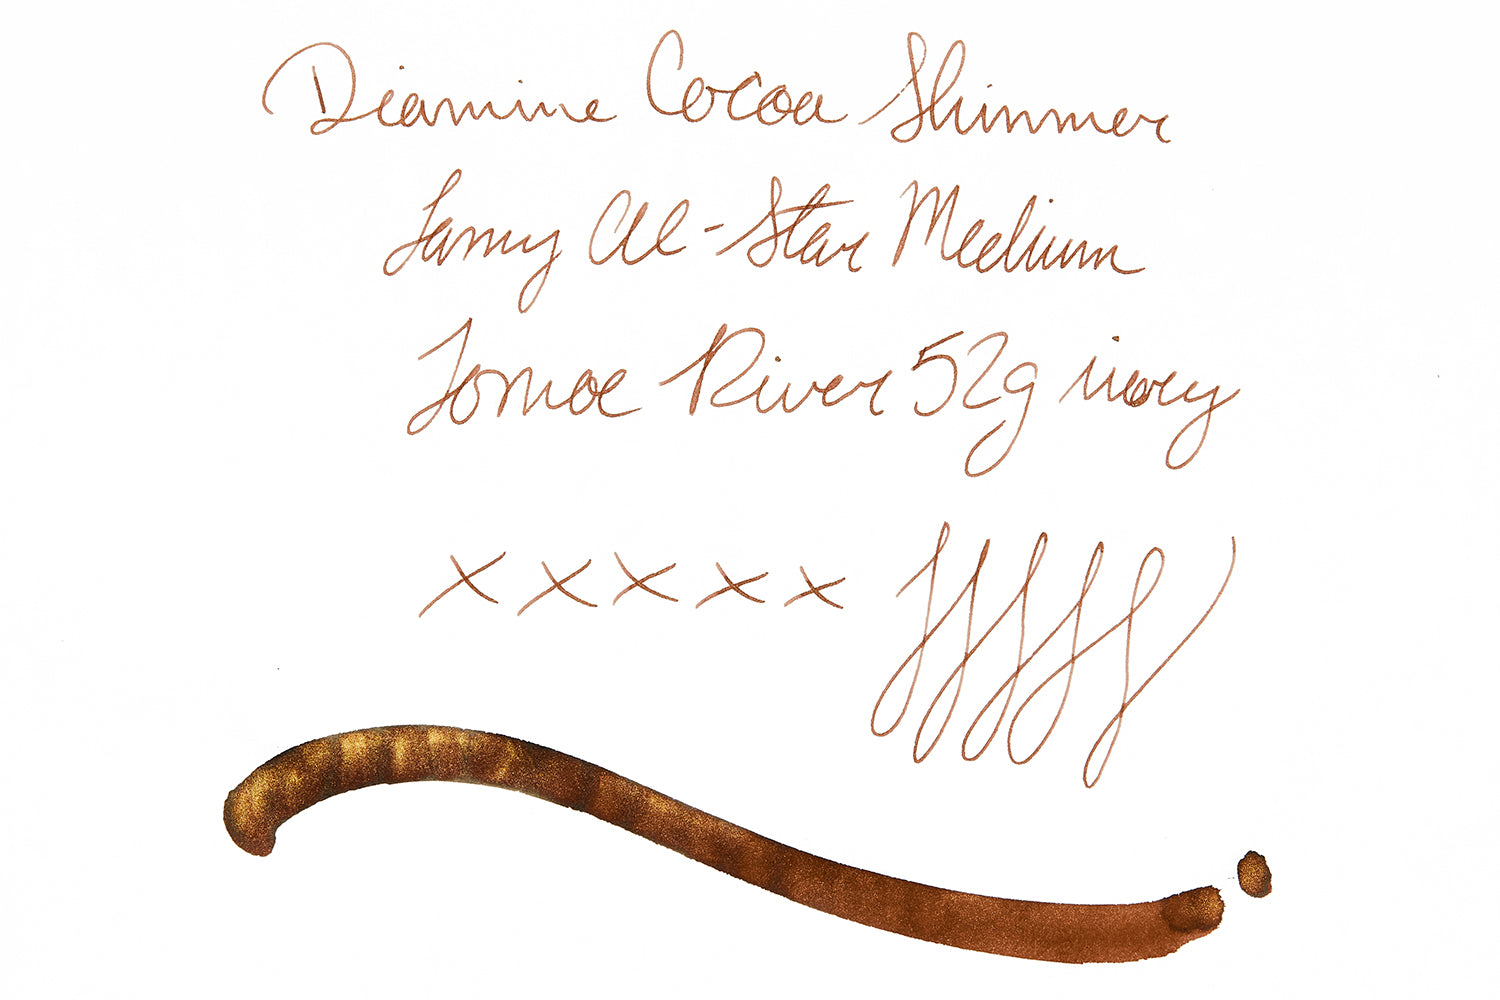 Diamine Cocoa Shimmer ink review on Tomoe River paper